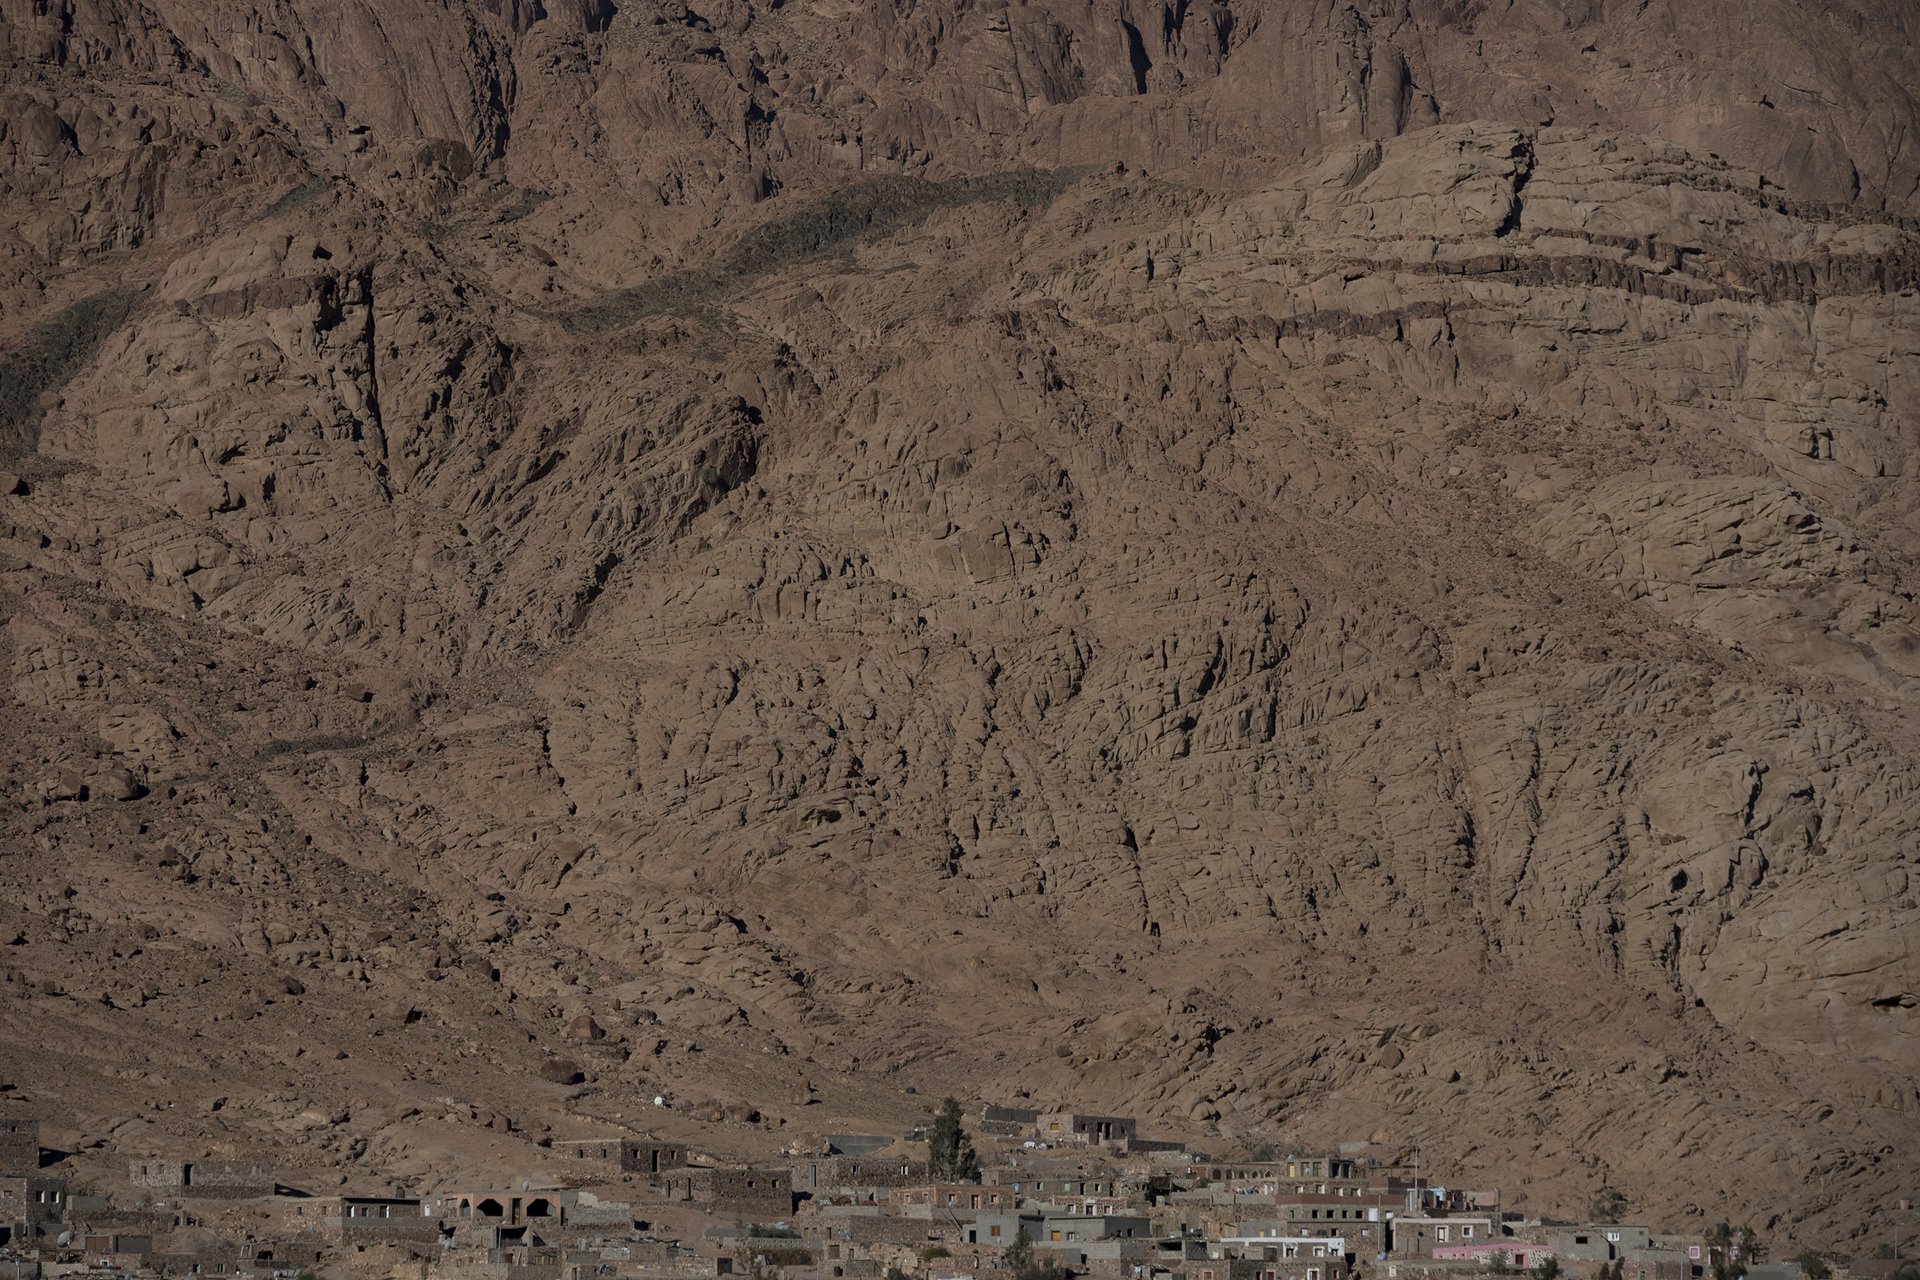 The city center of St, Catherine, South Sinai, Egypt. The region is naturally isolated from other regions in Egypt and is uniquely defined by the interconnectedness between people and land.